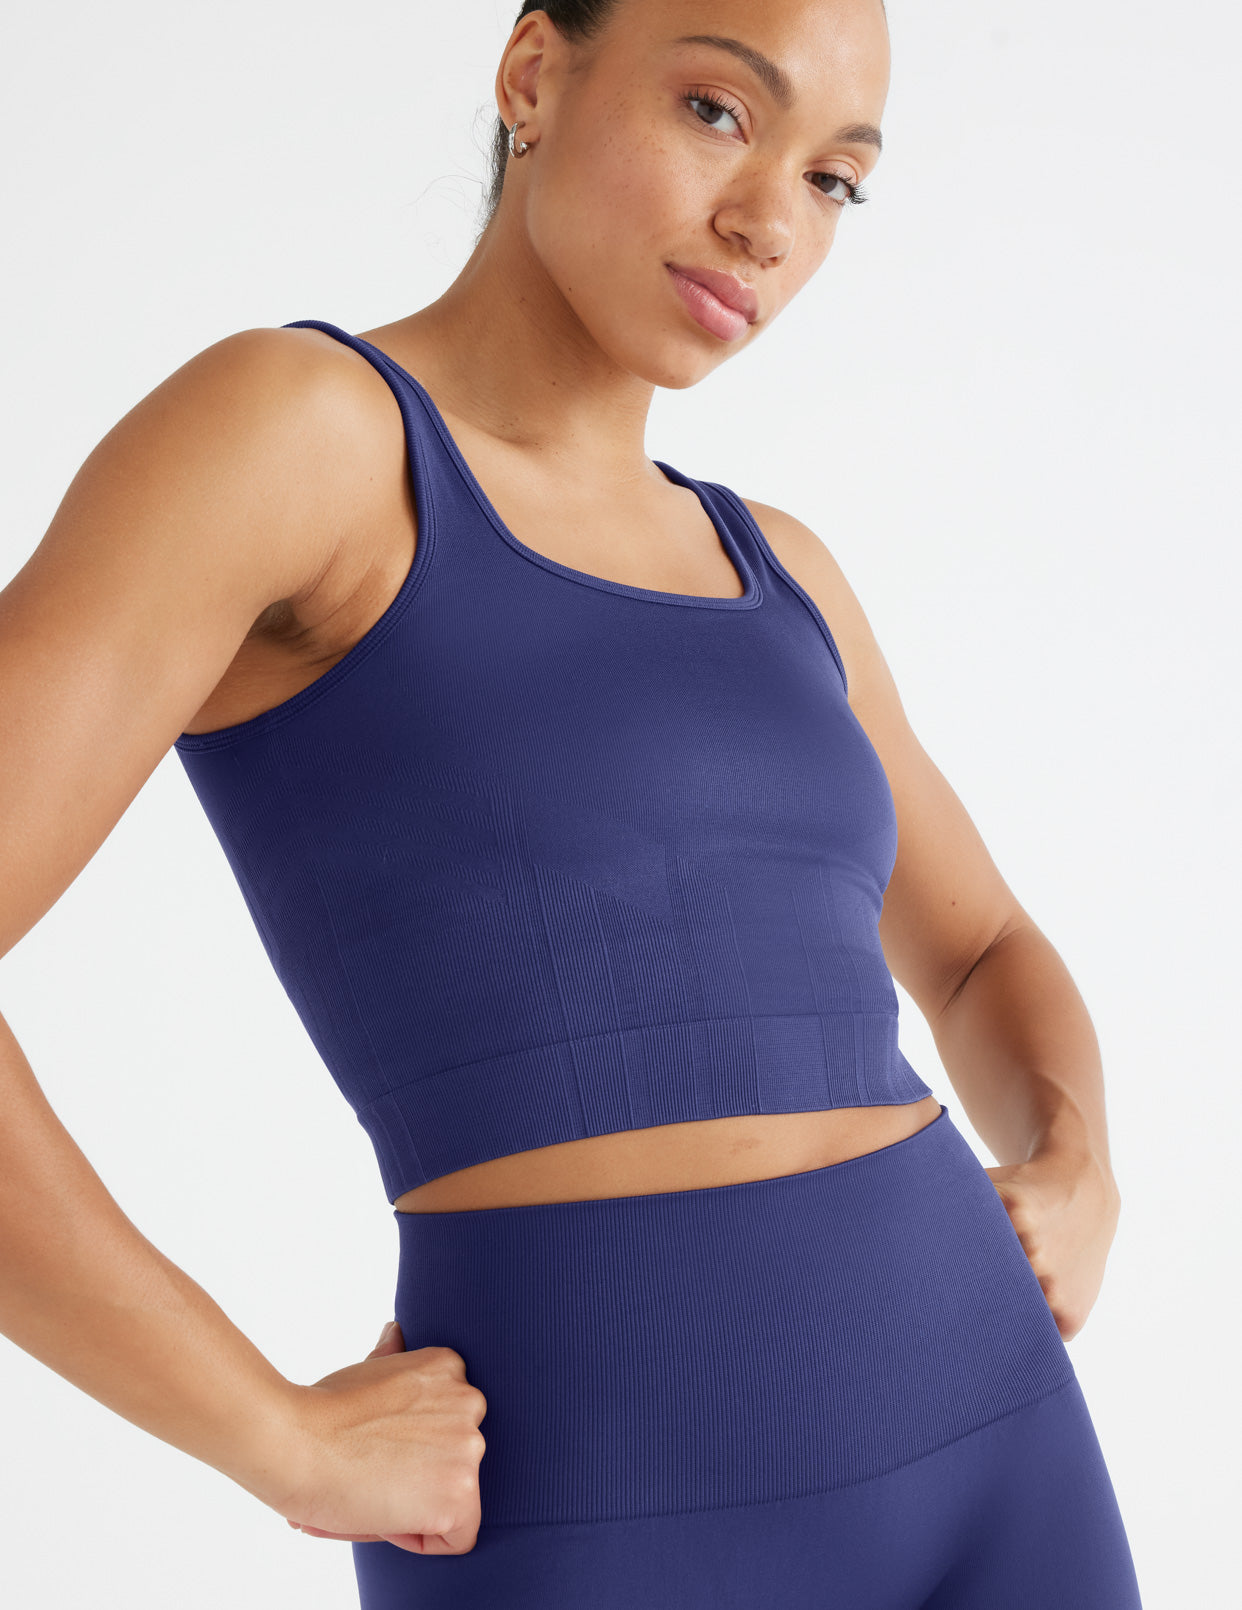 SO NWT Kohl's Juniors' Women's Blue Seamless Ribbed Workout